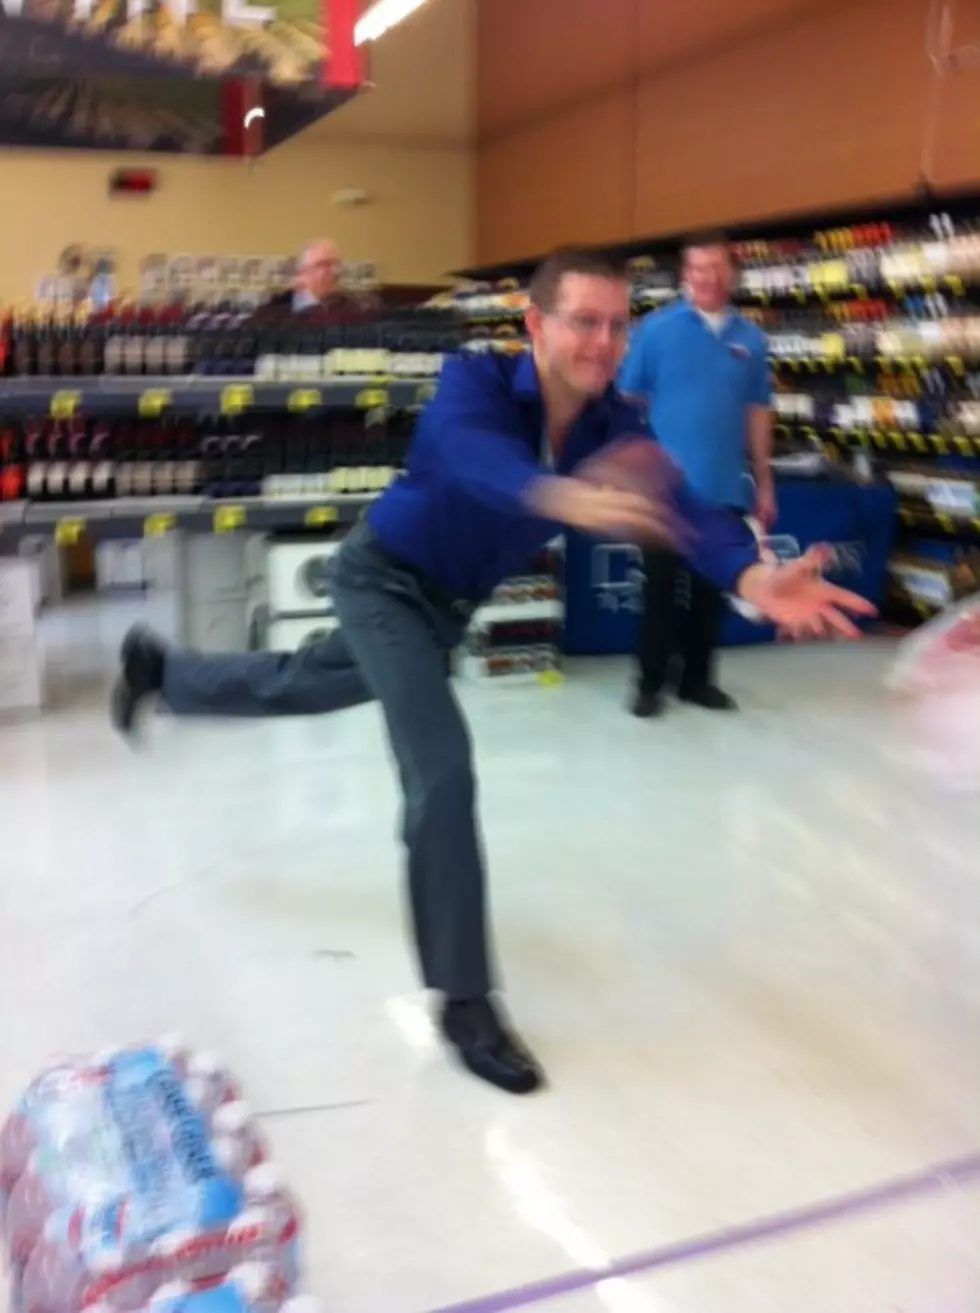 Turkey Bowling at Grocery Outlet, All For a Good Cause